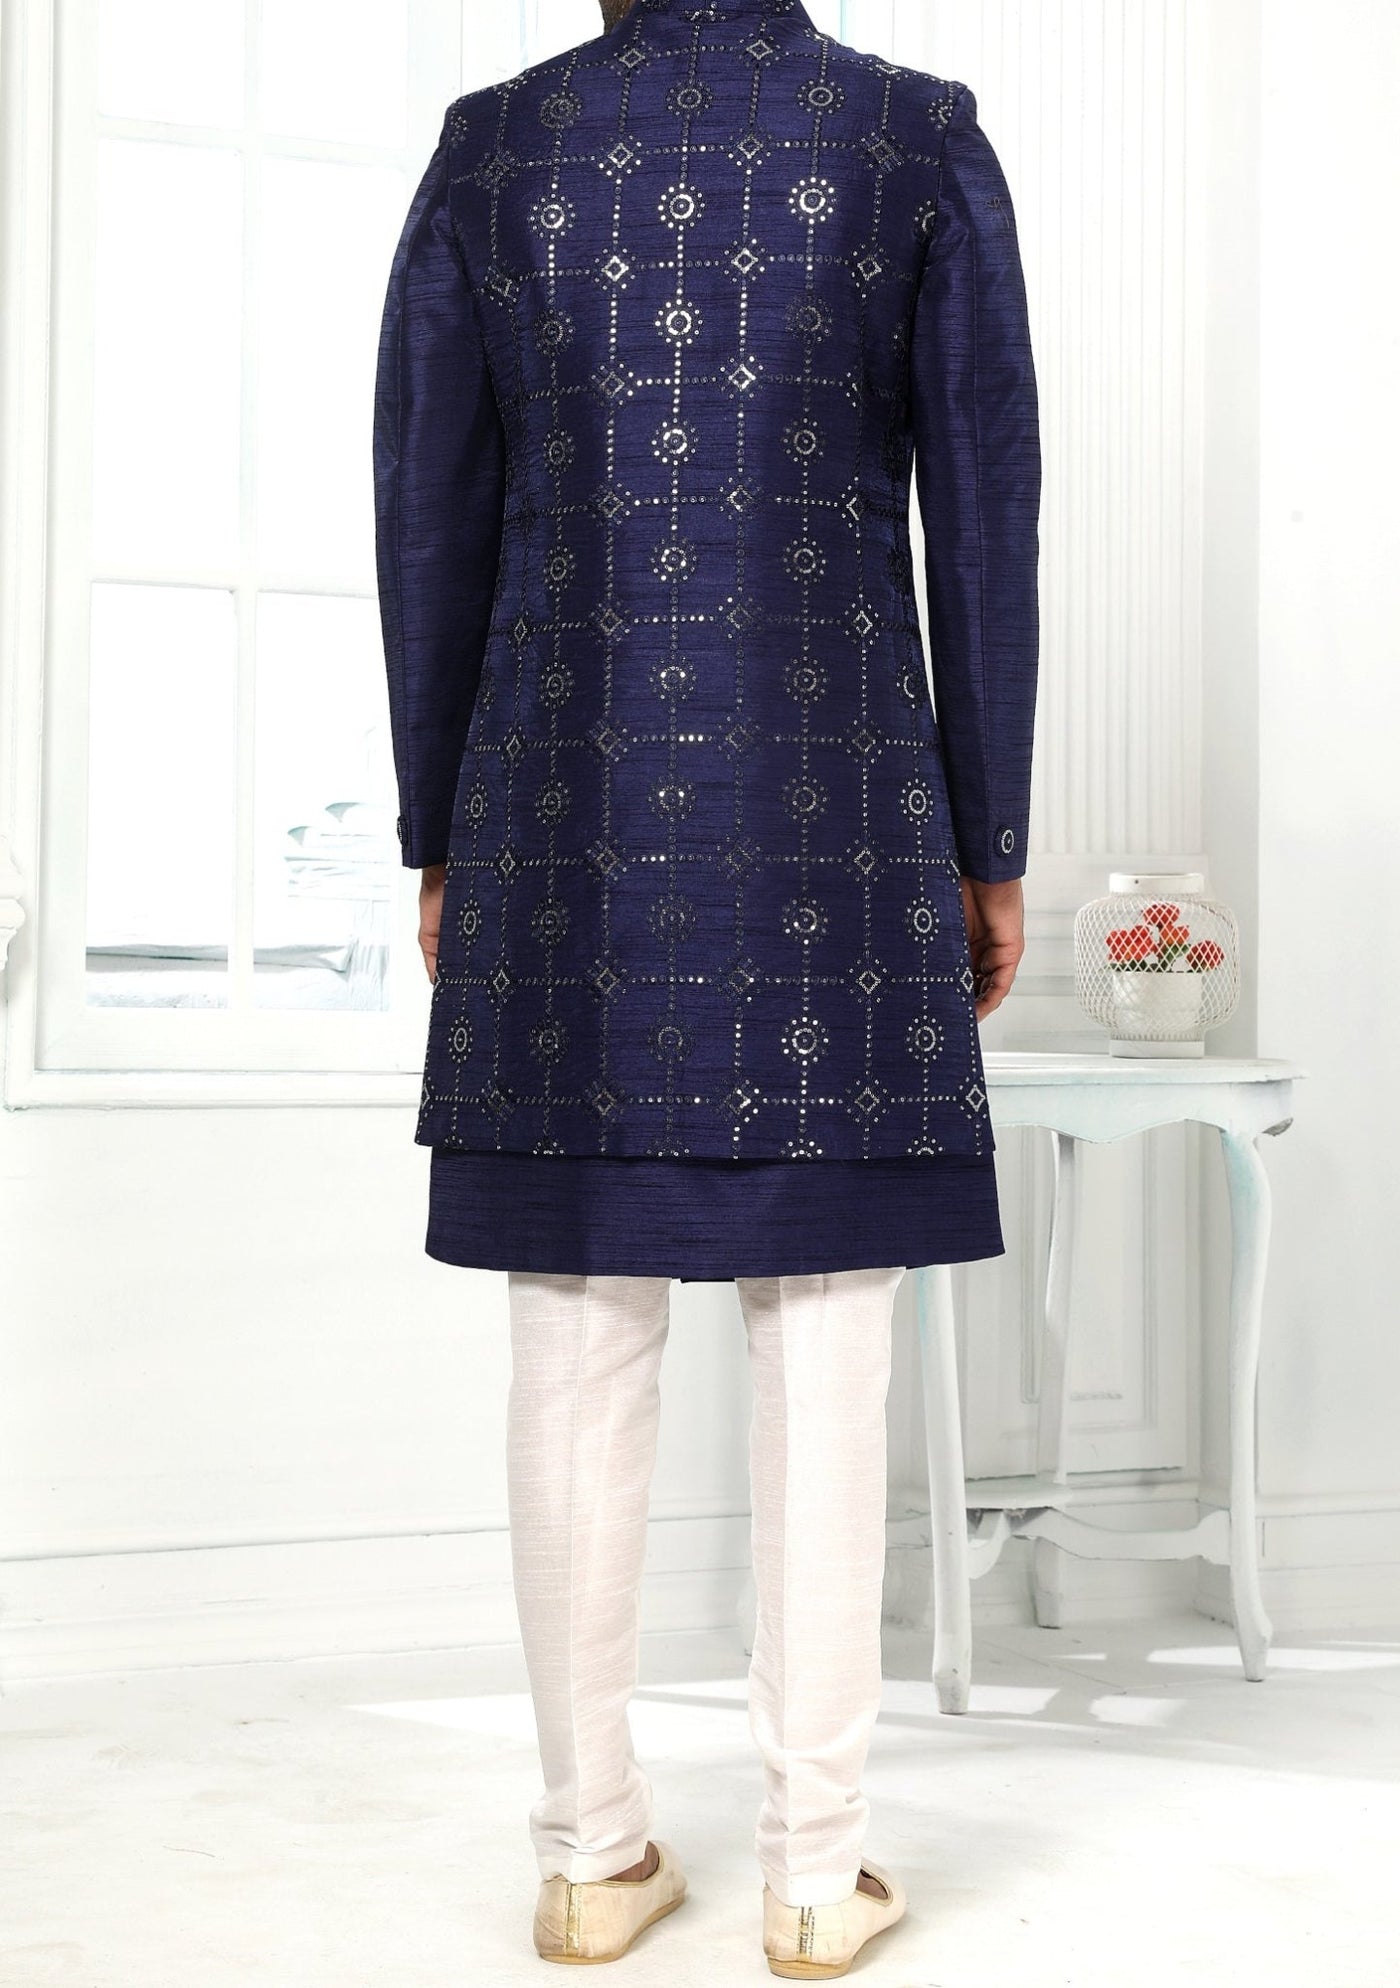 Men's Indo Western Party Wear Sherwani Suit With Jacket - db20441